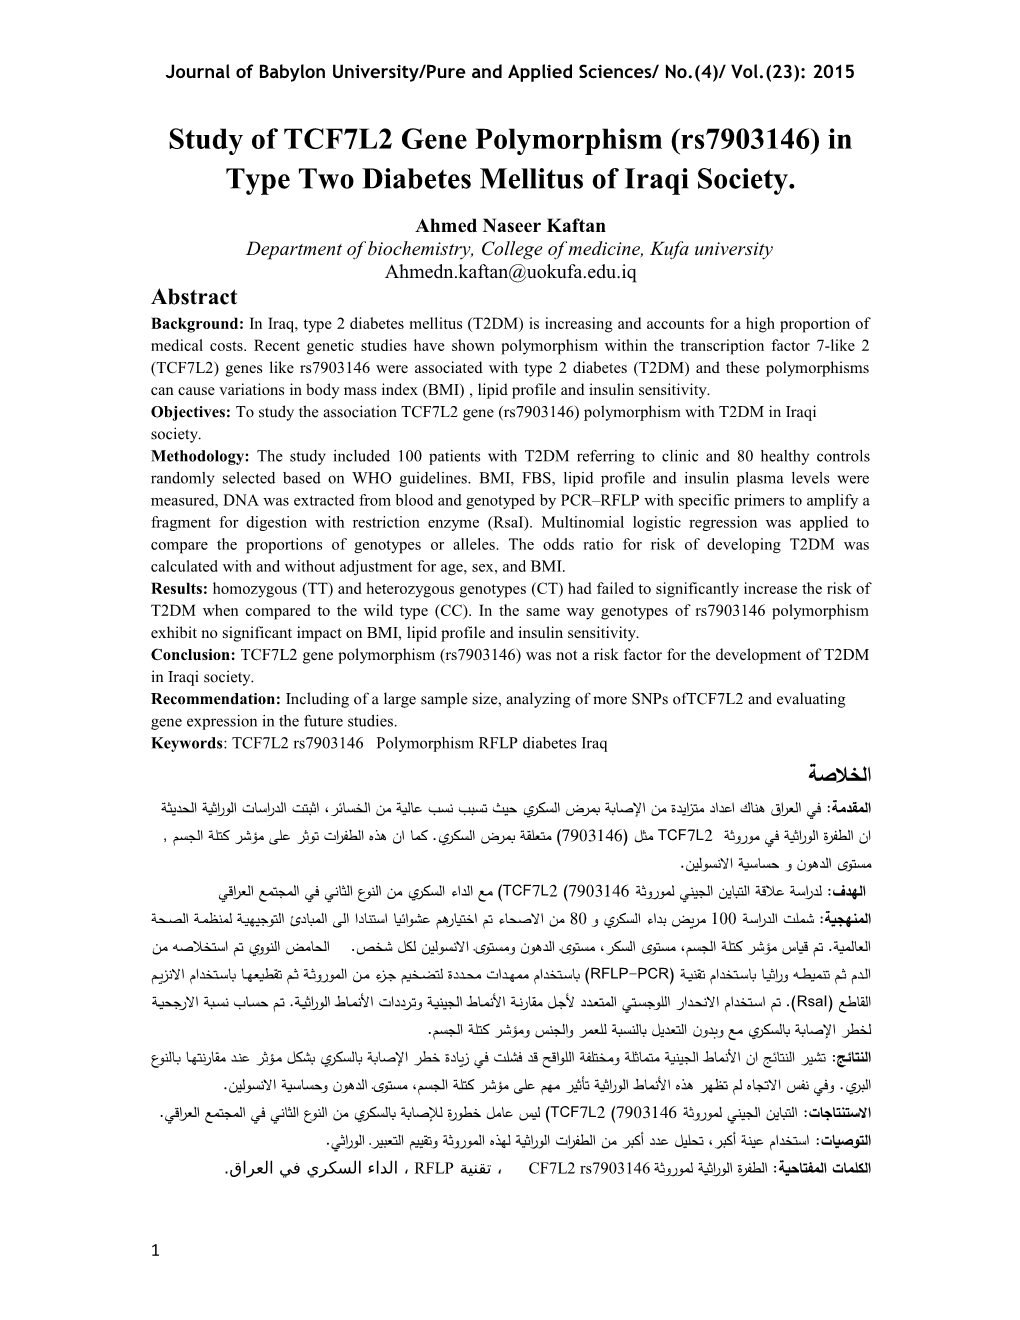 Study of TCF7L2 Gene Polymorphism (Rs7903146) in Type Two Diabetes Mellitus of Iraqi Society